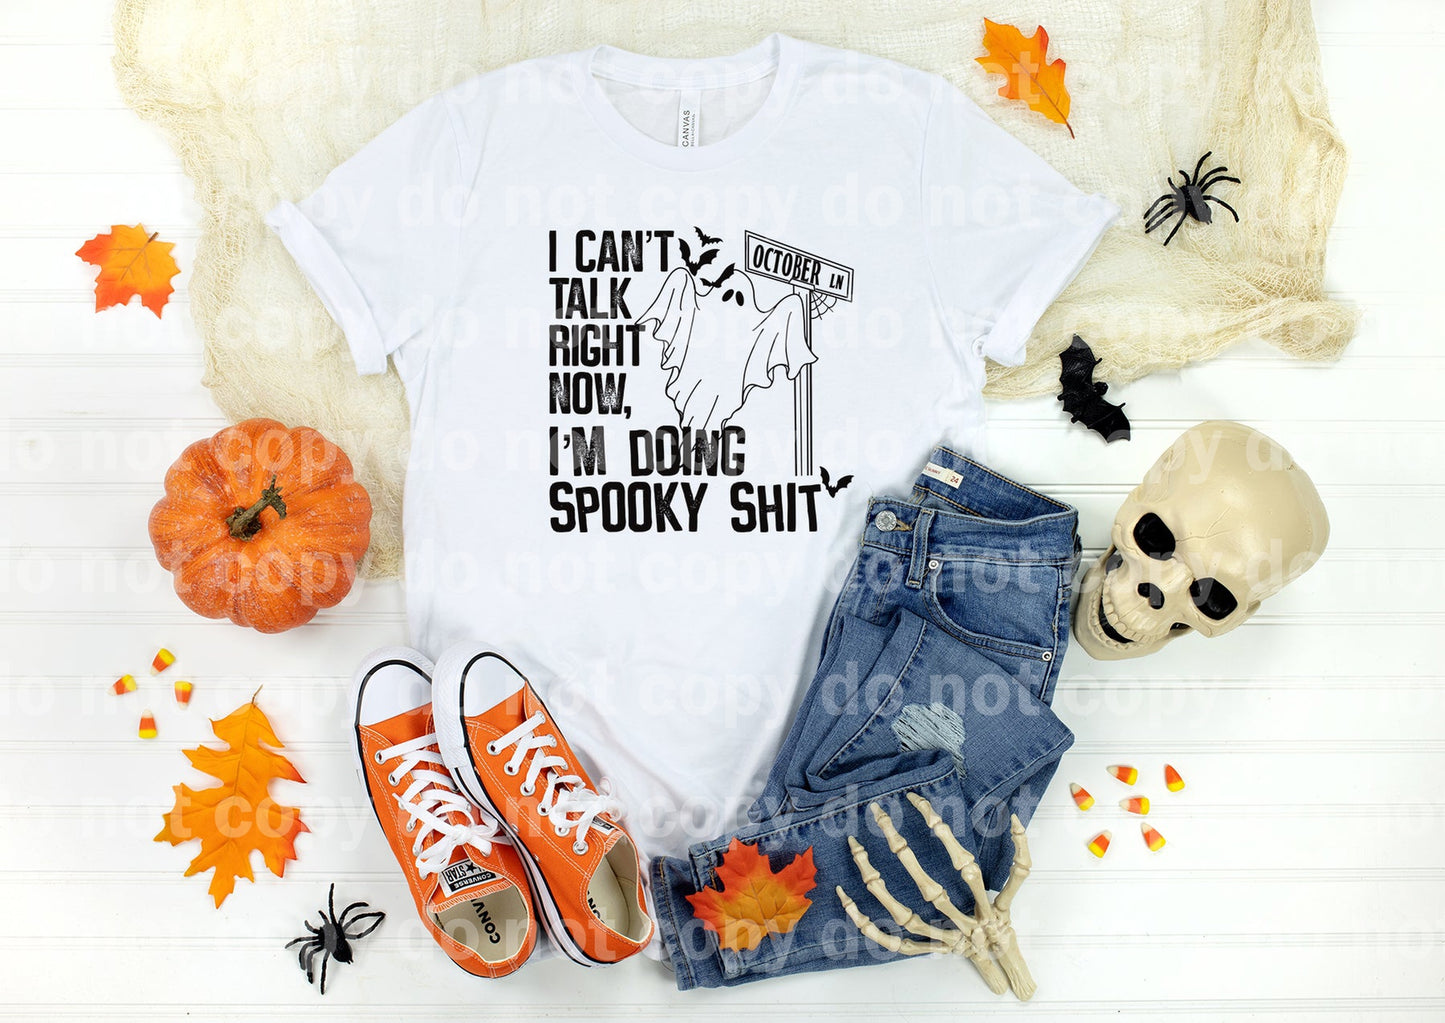 I Can't Talk Right Now, I'm Doing Spooky Shit Dream Print or Sublimation Print